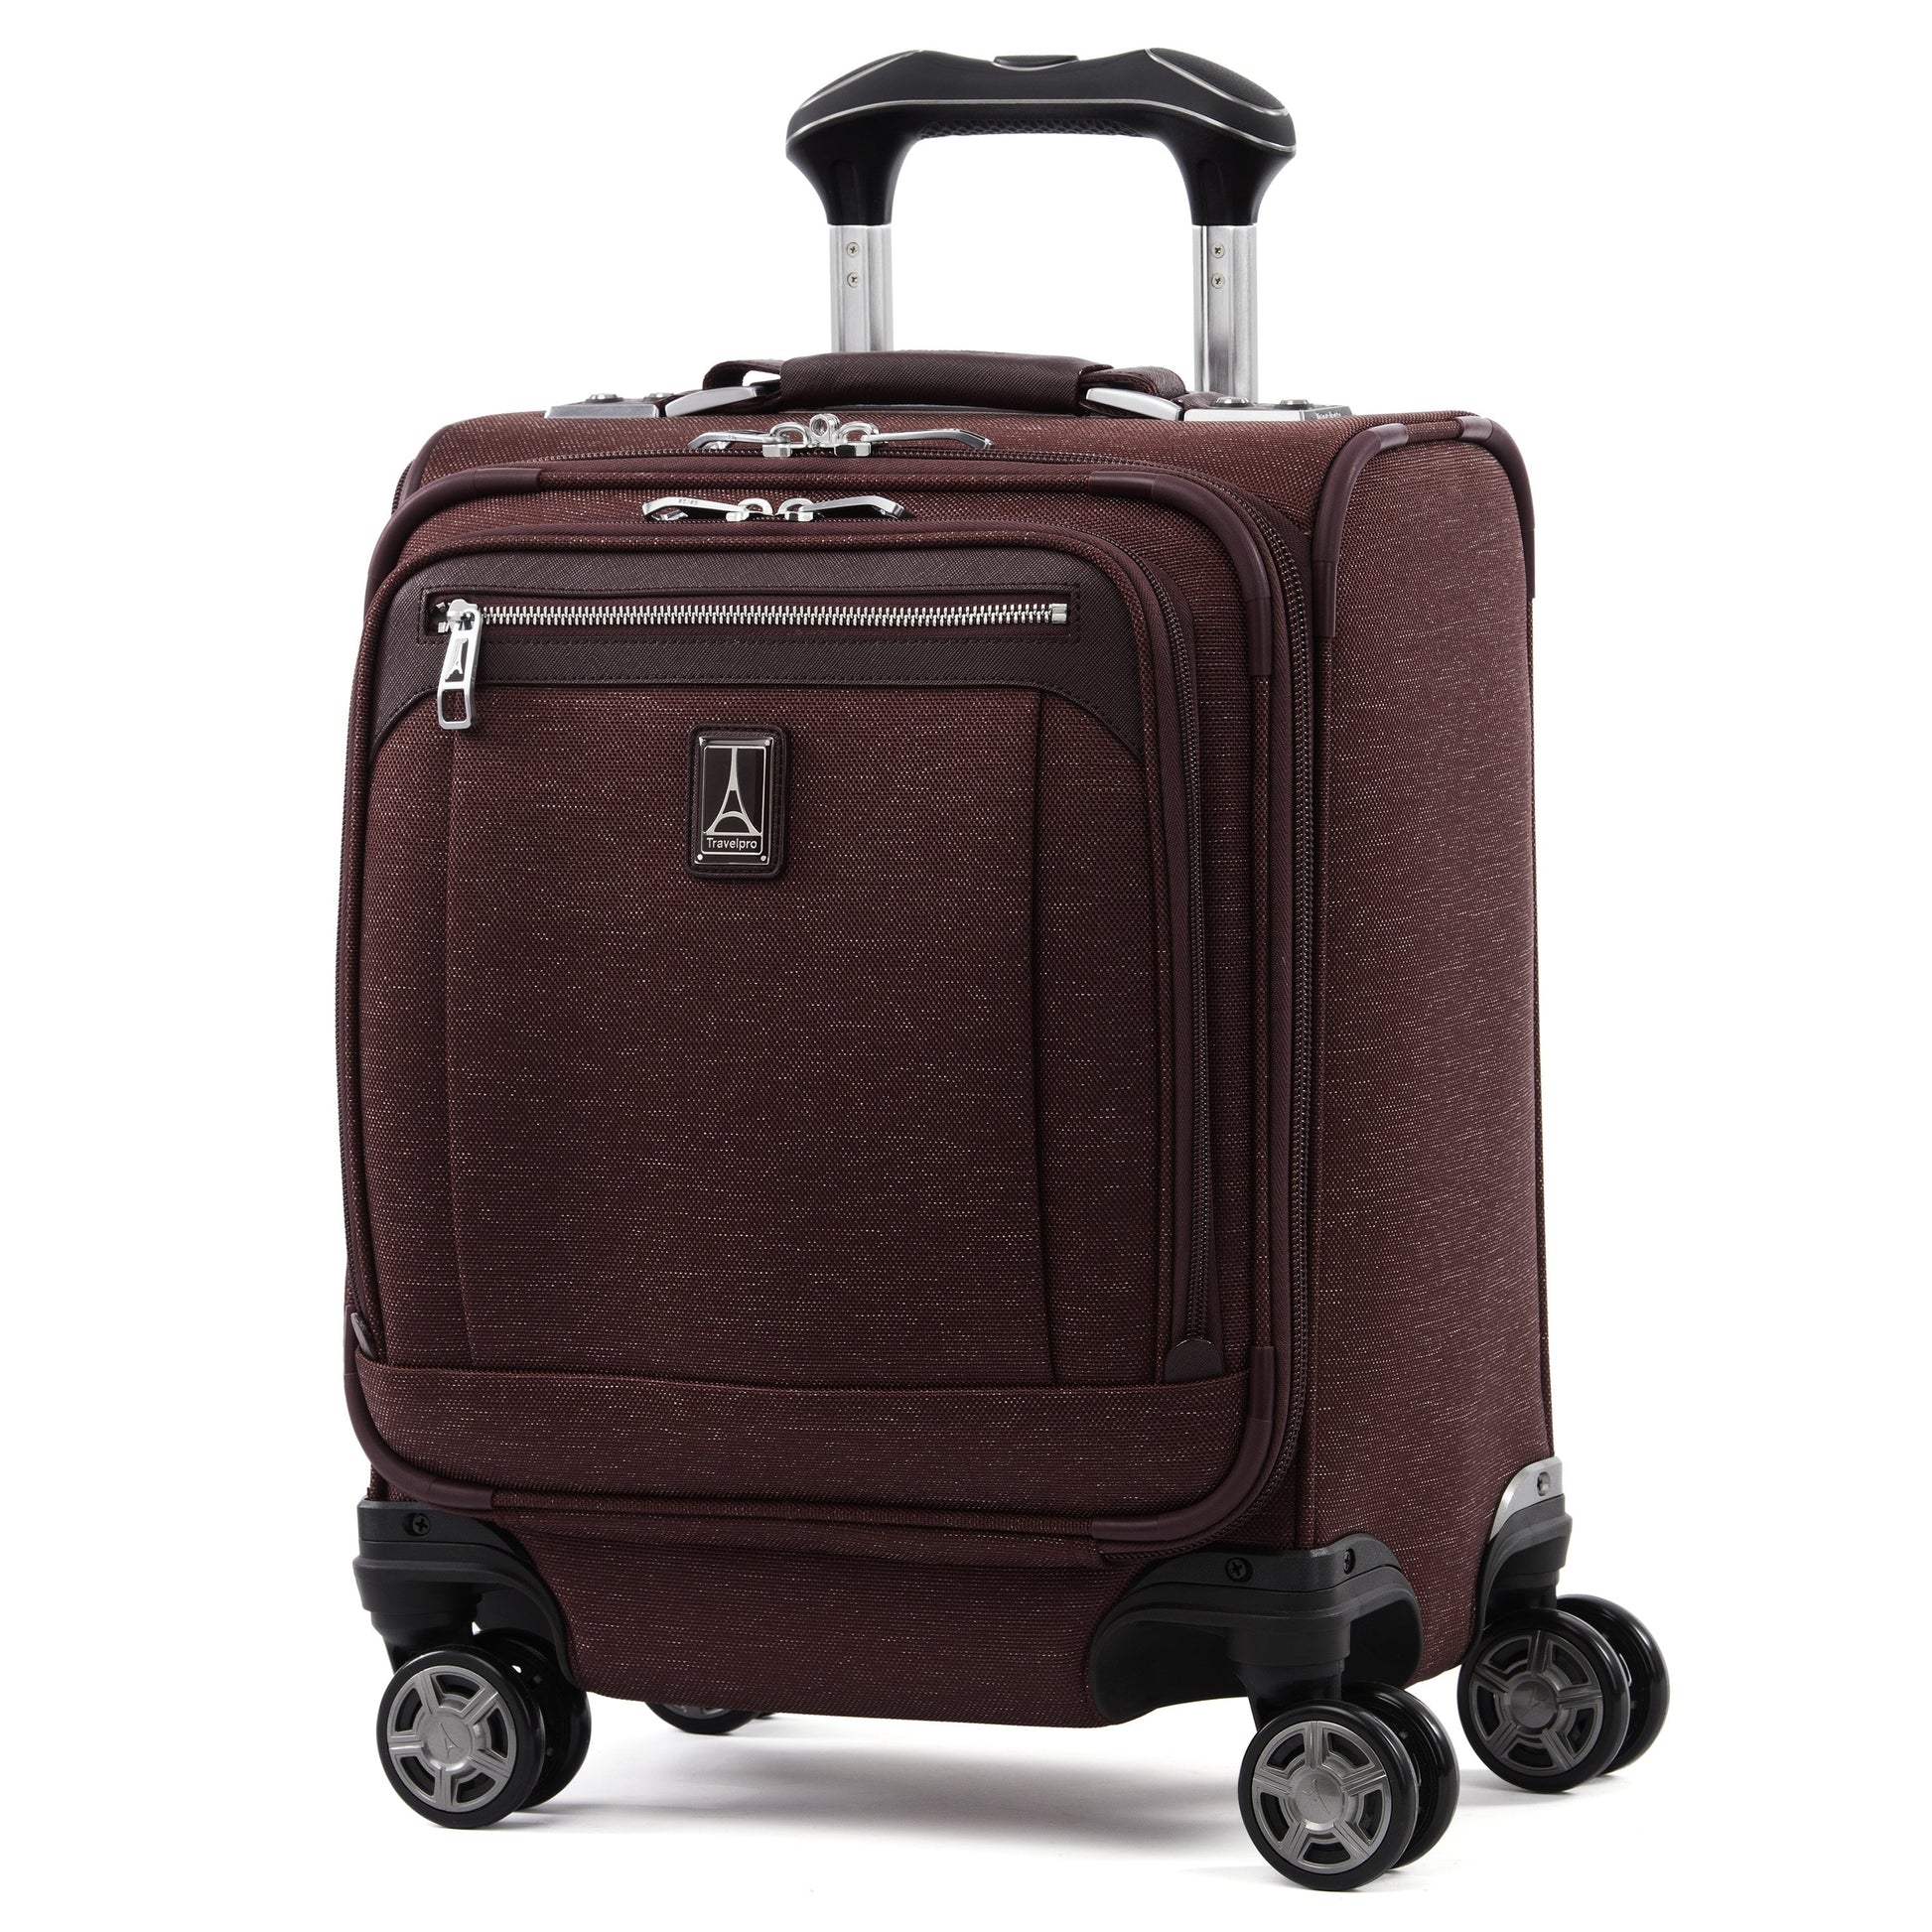 Travelpro Platinum Elite Carry-On Spinner Tote - Bordeaux